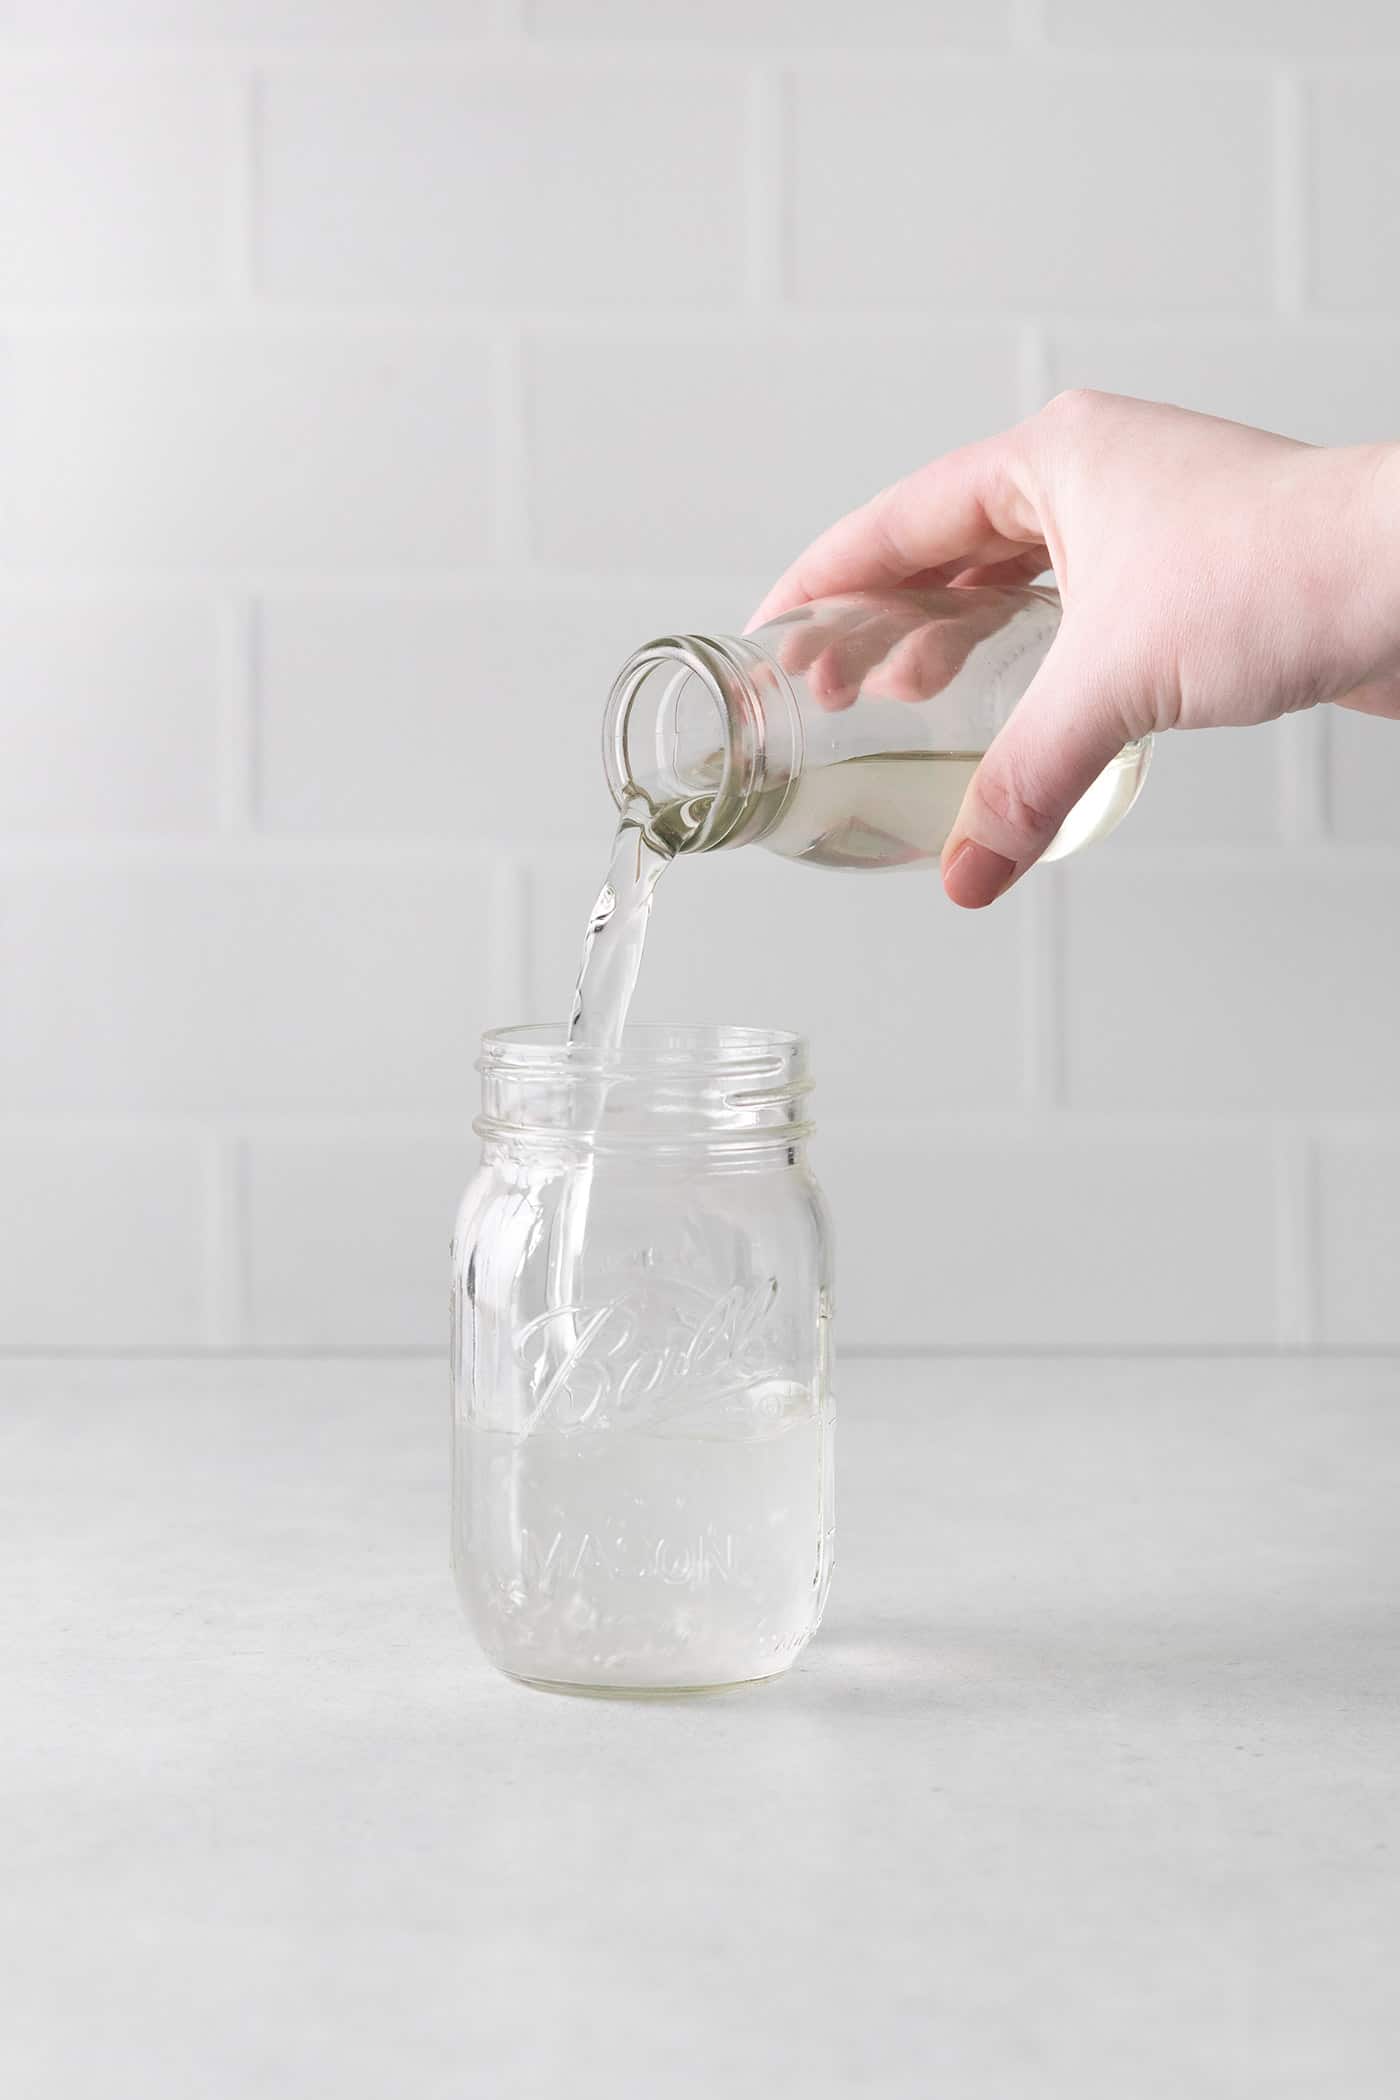 pouring simple syrup into a jar